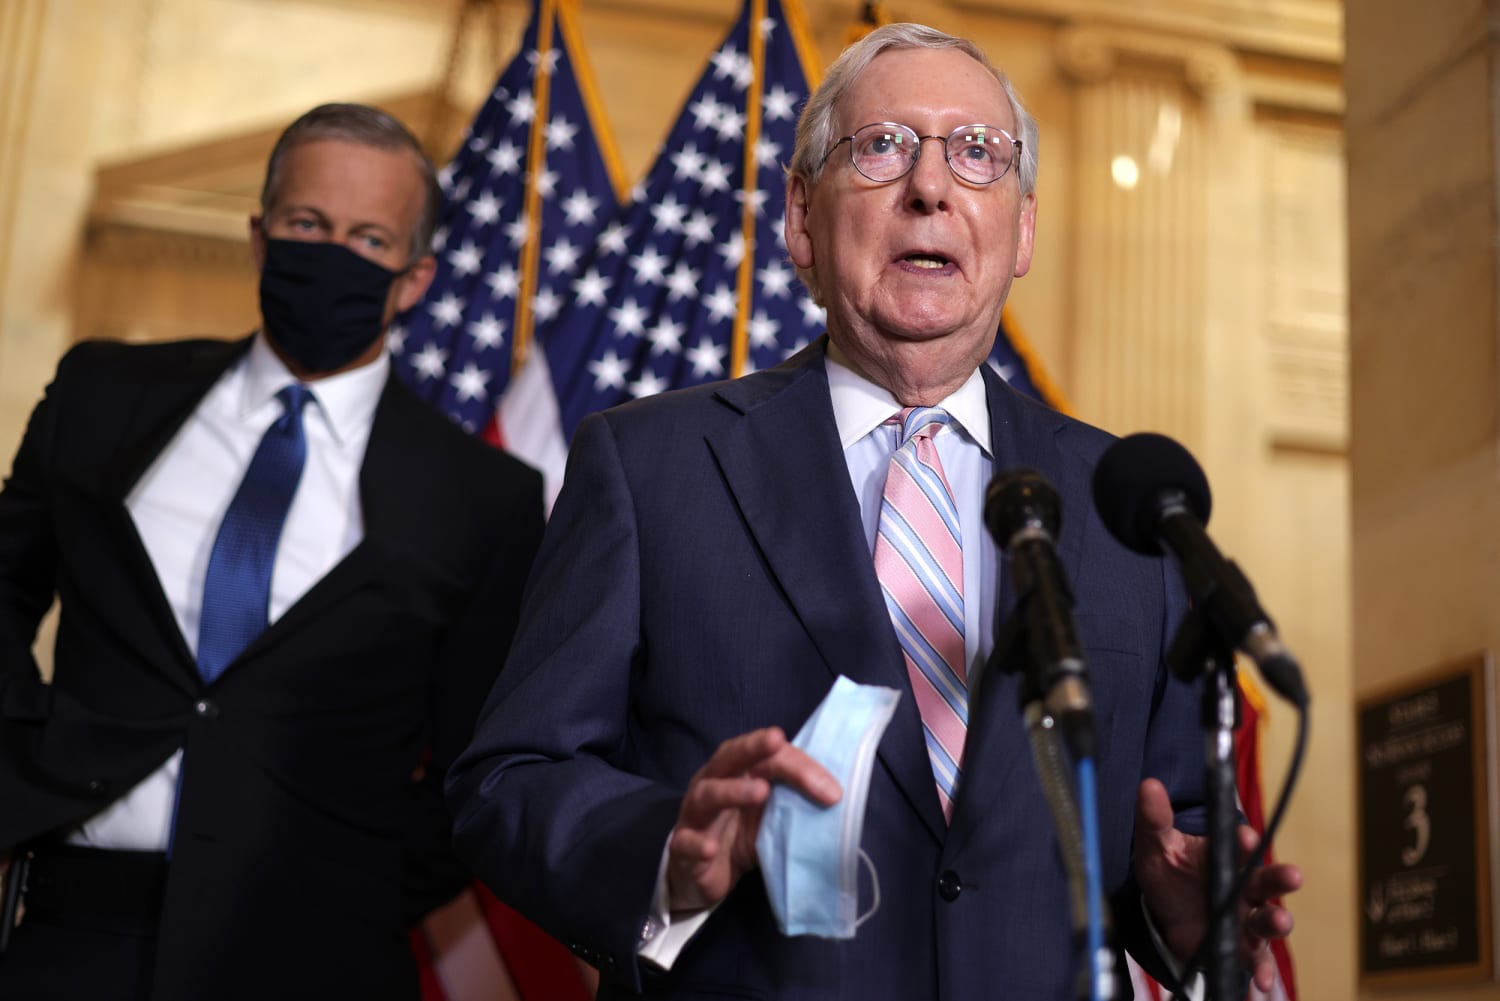 McConnell tries to shift Senate focus from his health to spending